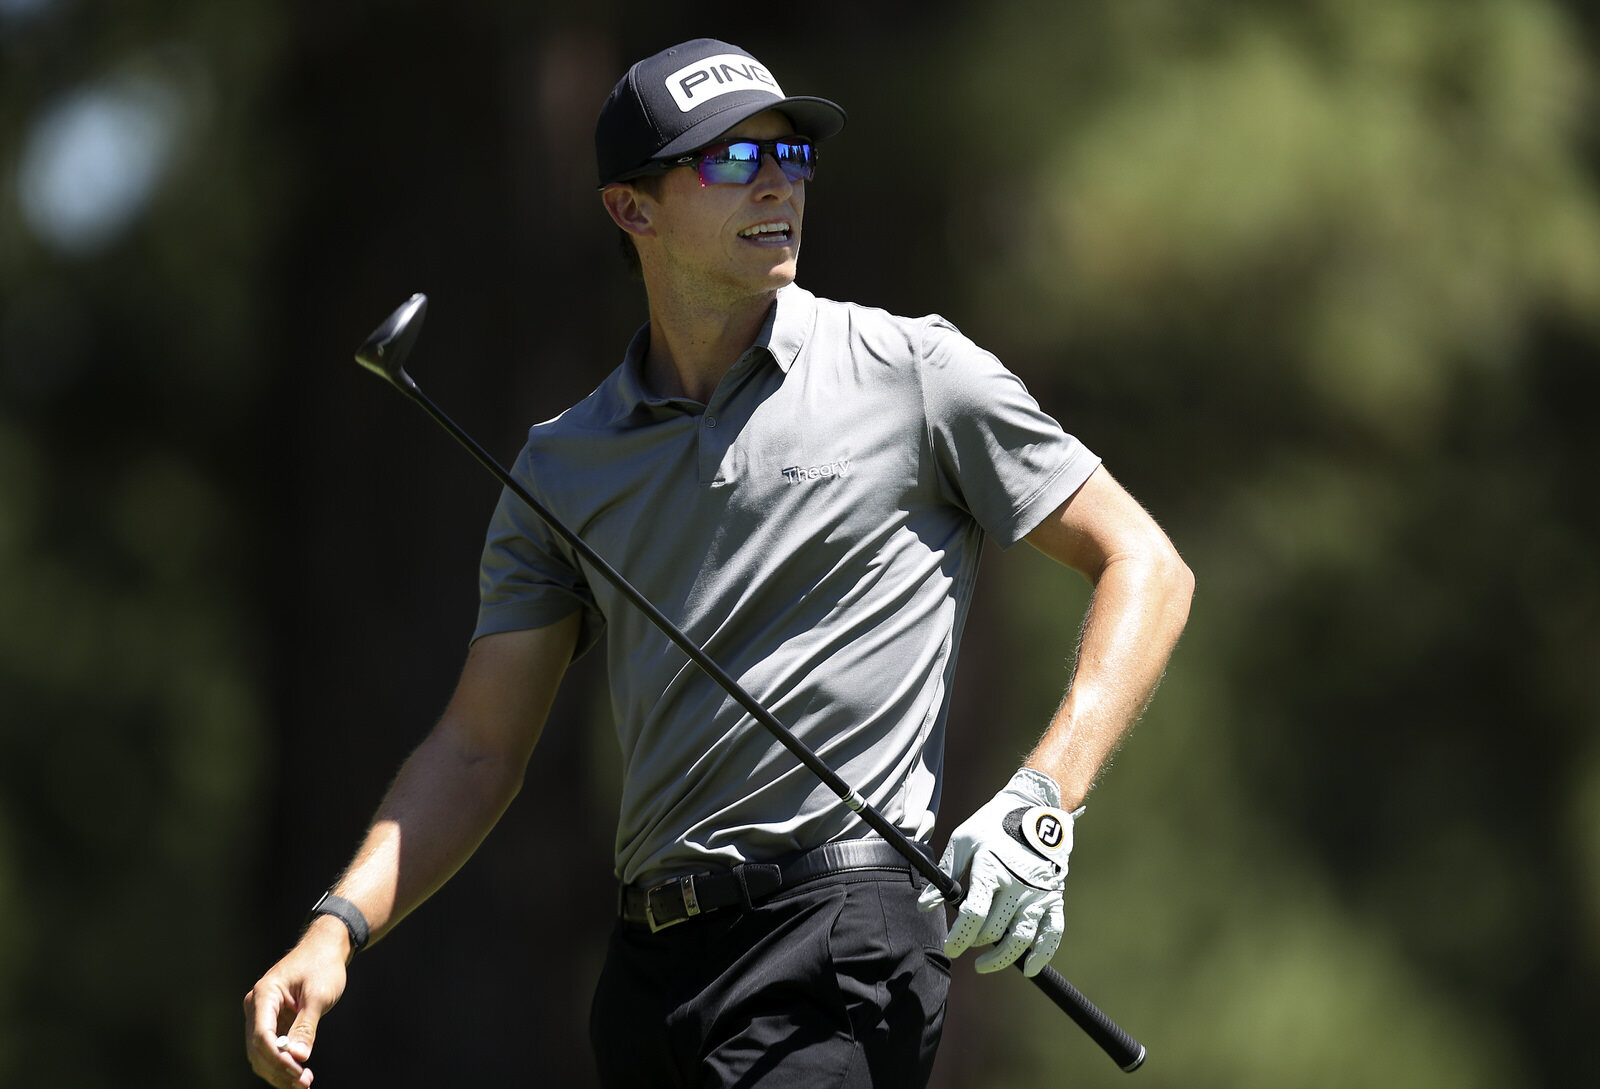  TRUCKEE, CALIFORNIA - AUGUST 01: Brandon Hagy plays his shot from the sixth tee during the third round of the Barracuda Championship at Tahoe Mountain Club's Old Greenwood Golf Course on August 01, 2020 in Truckee, California. (Photo by Jed Jacobsoh